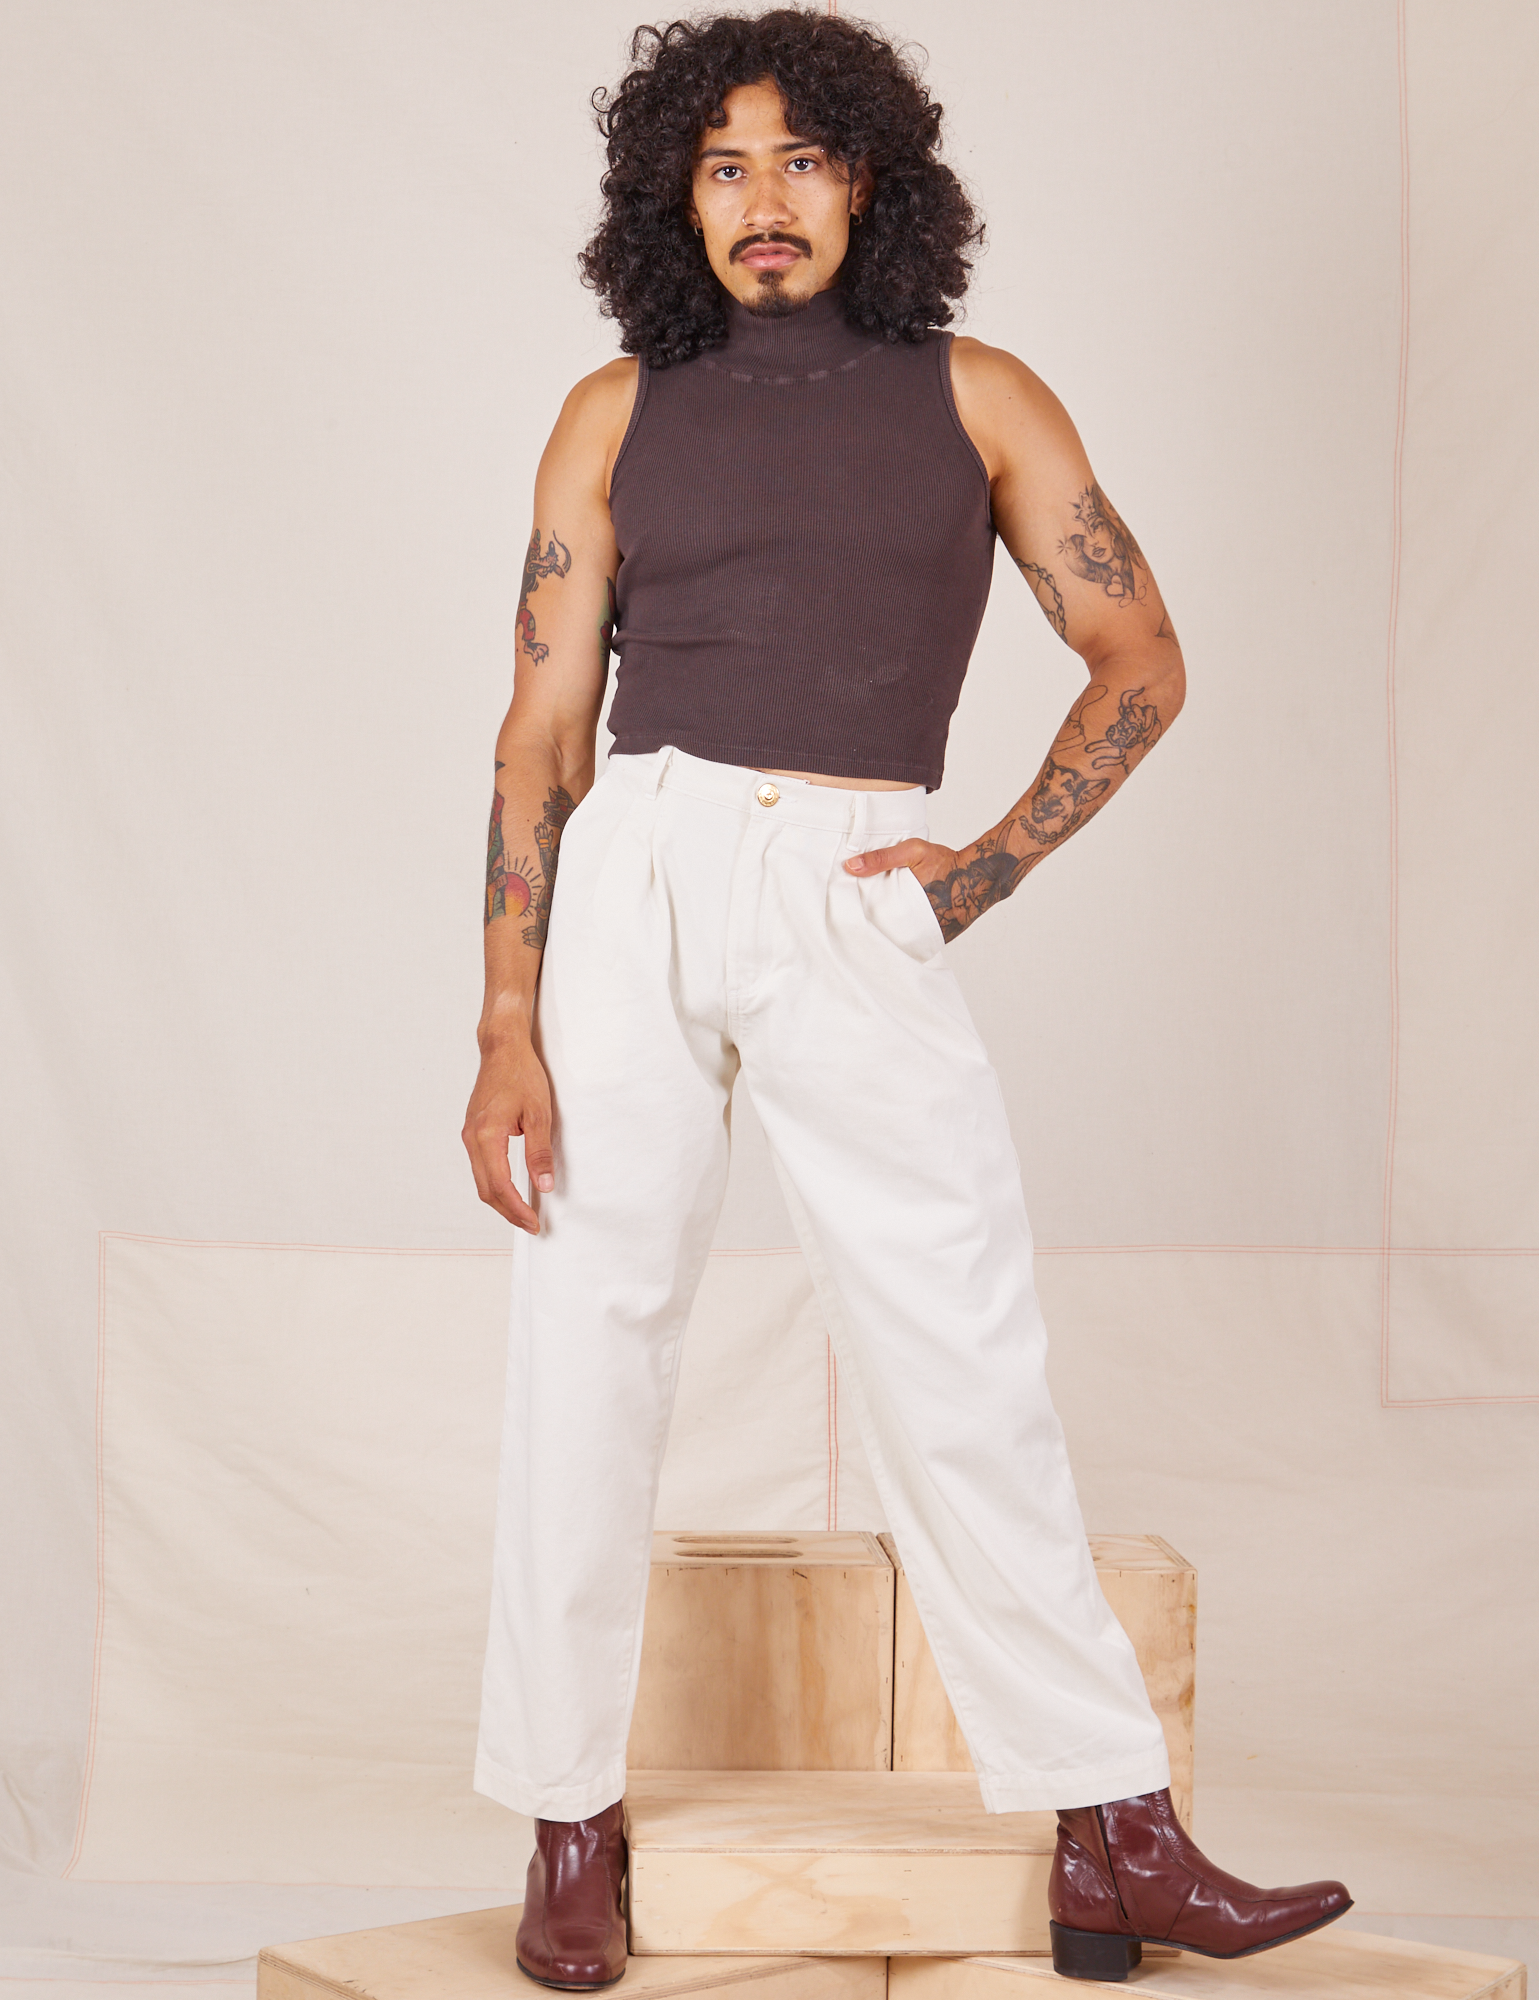 Jesse is 5&#39;8&quot; and wearing XXS Heavyweight Trousers in Vintage Off-White and espresso brown Sleeveless Turtleneck.